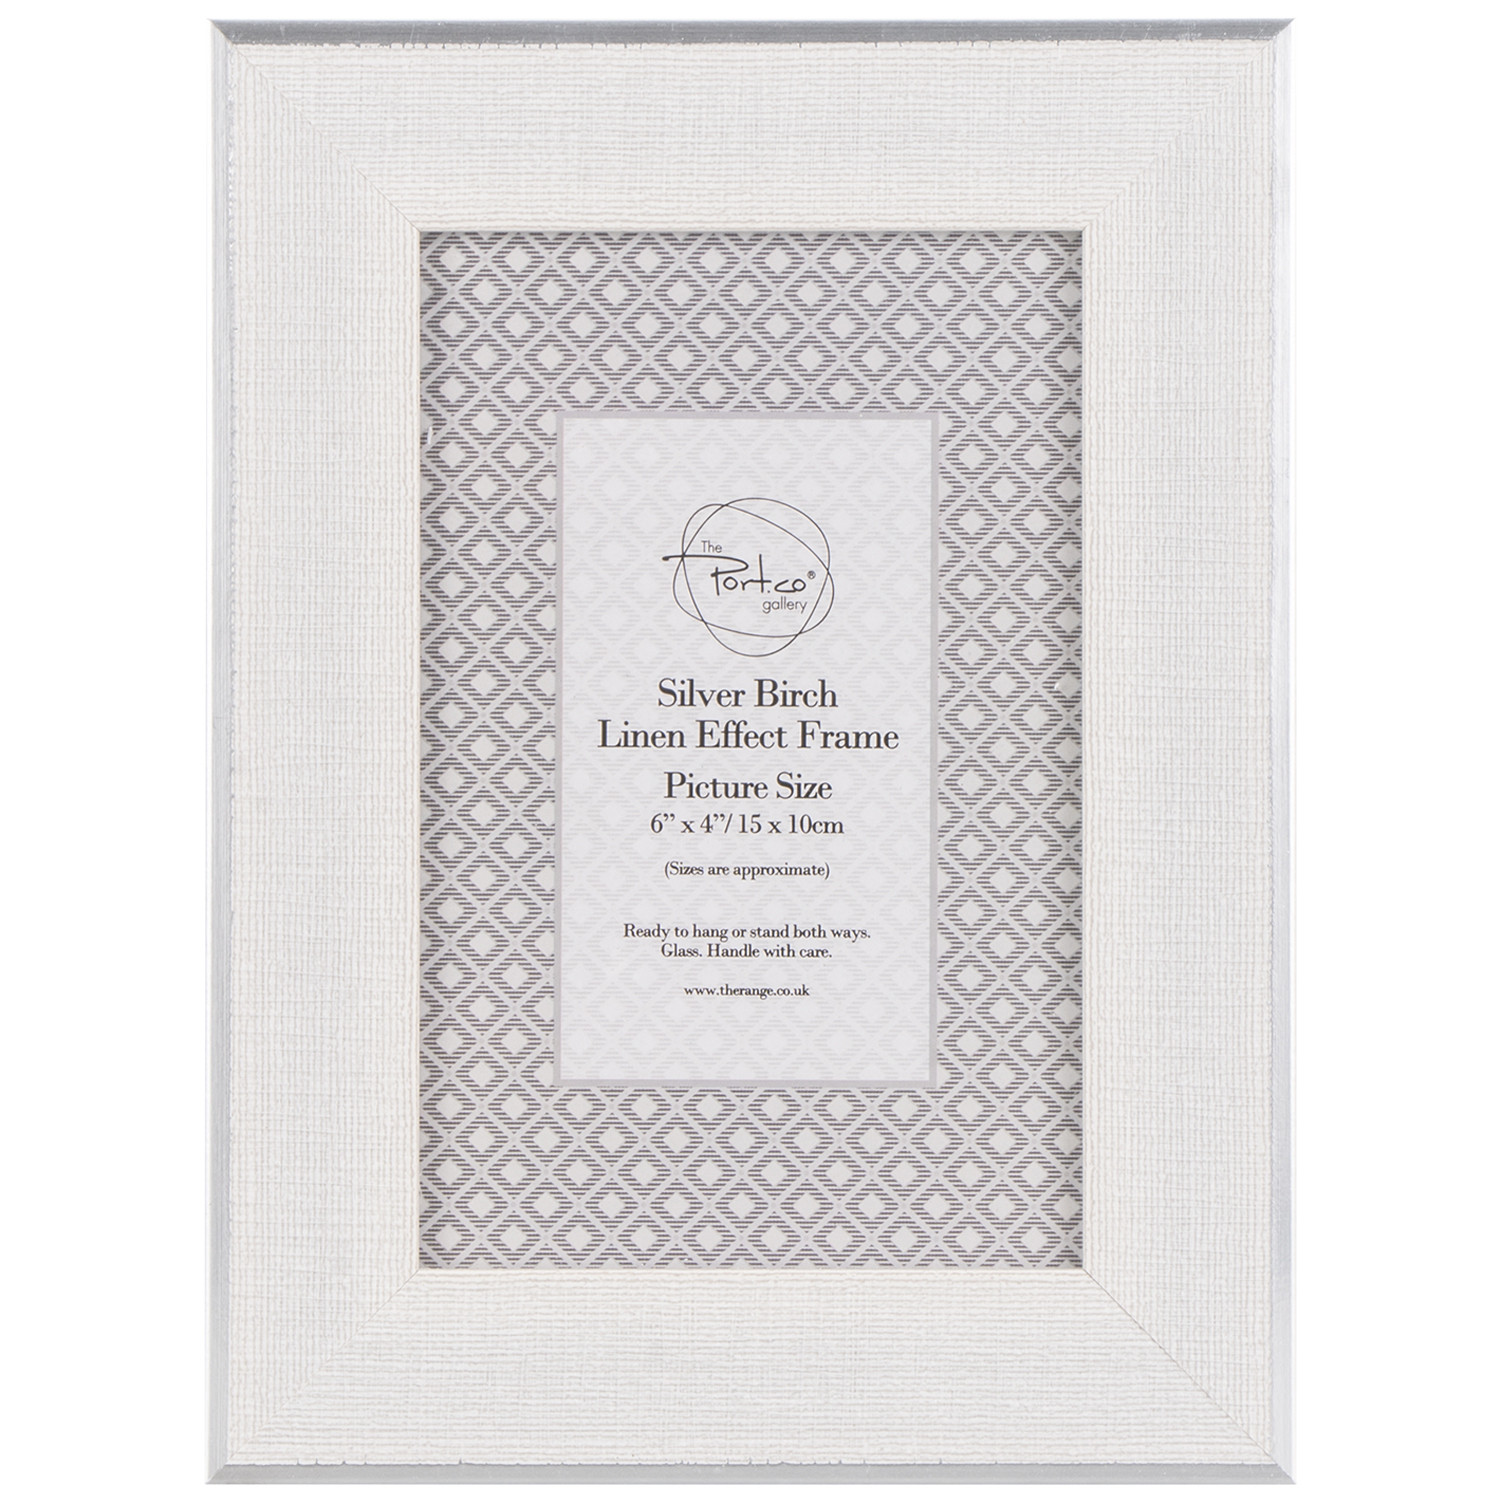 The Port. Co Gallery Birch Silver Linen Effect Photo Frame 6 x 4 inch Image